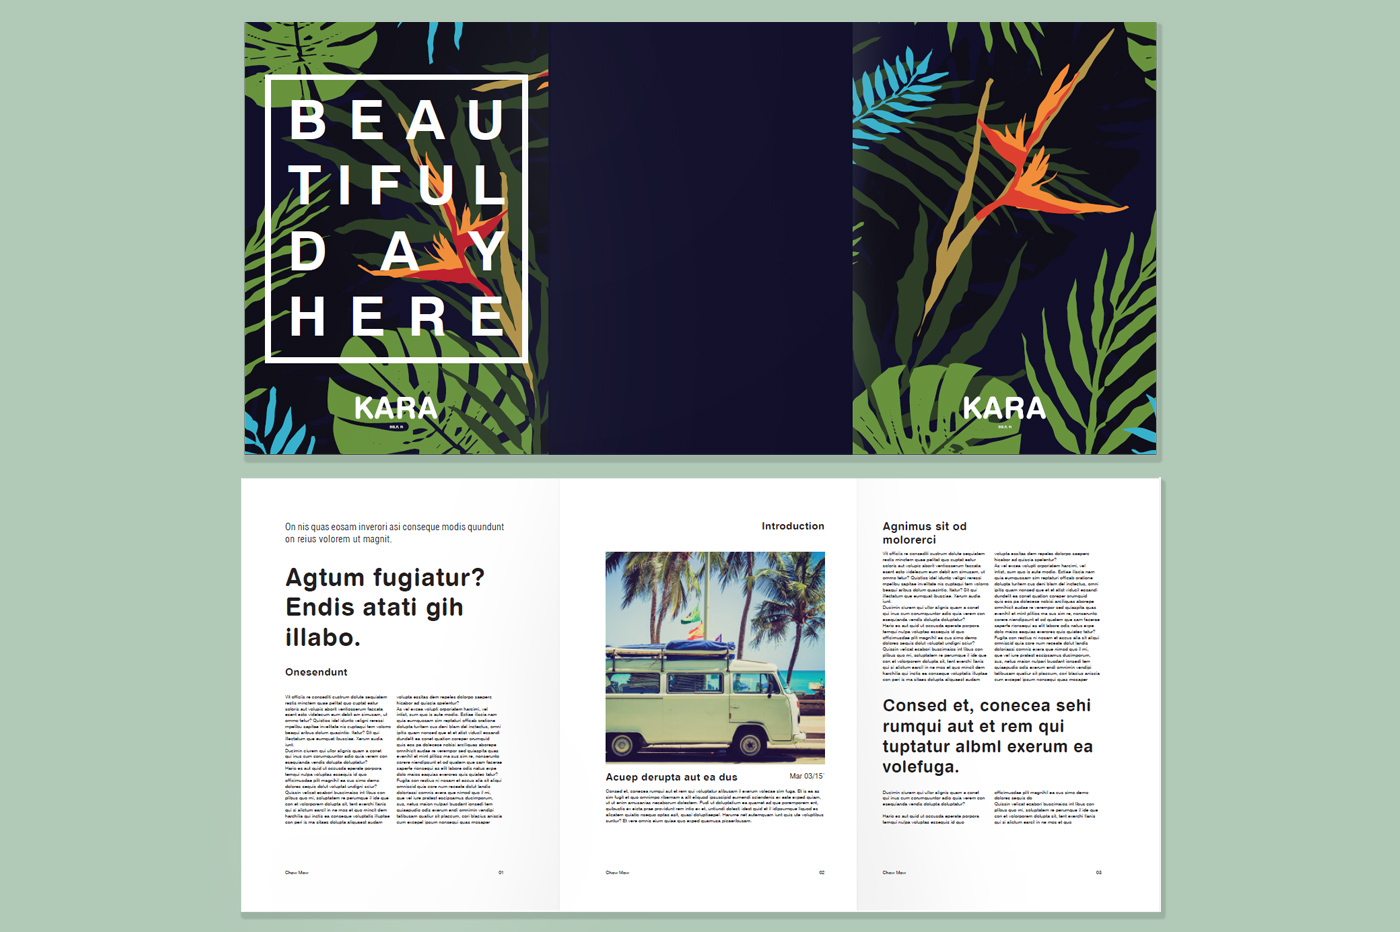 Tropical Branding (InDesign) FREE